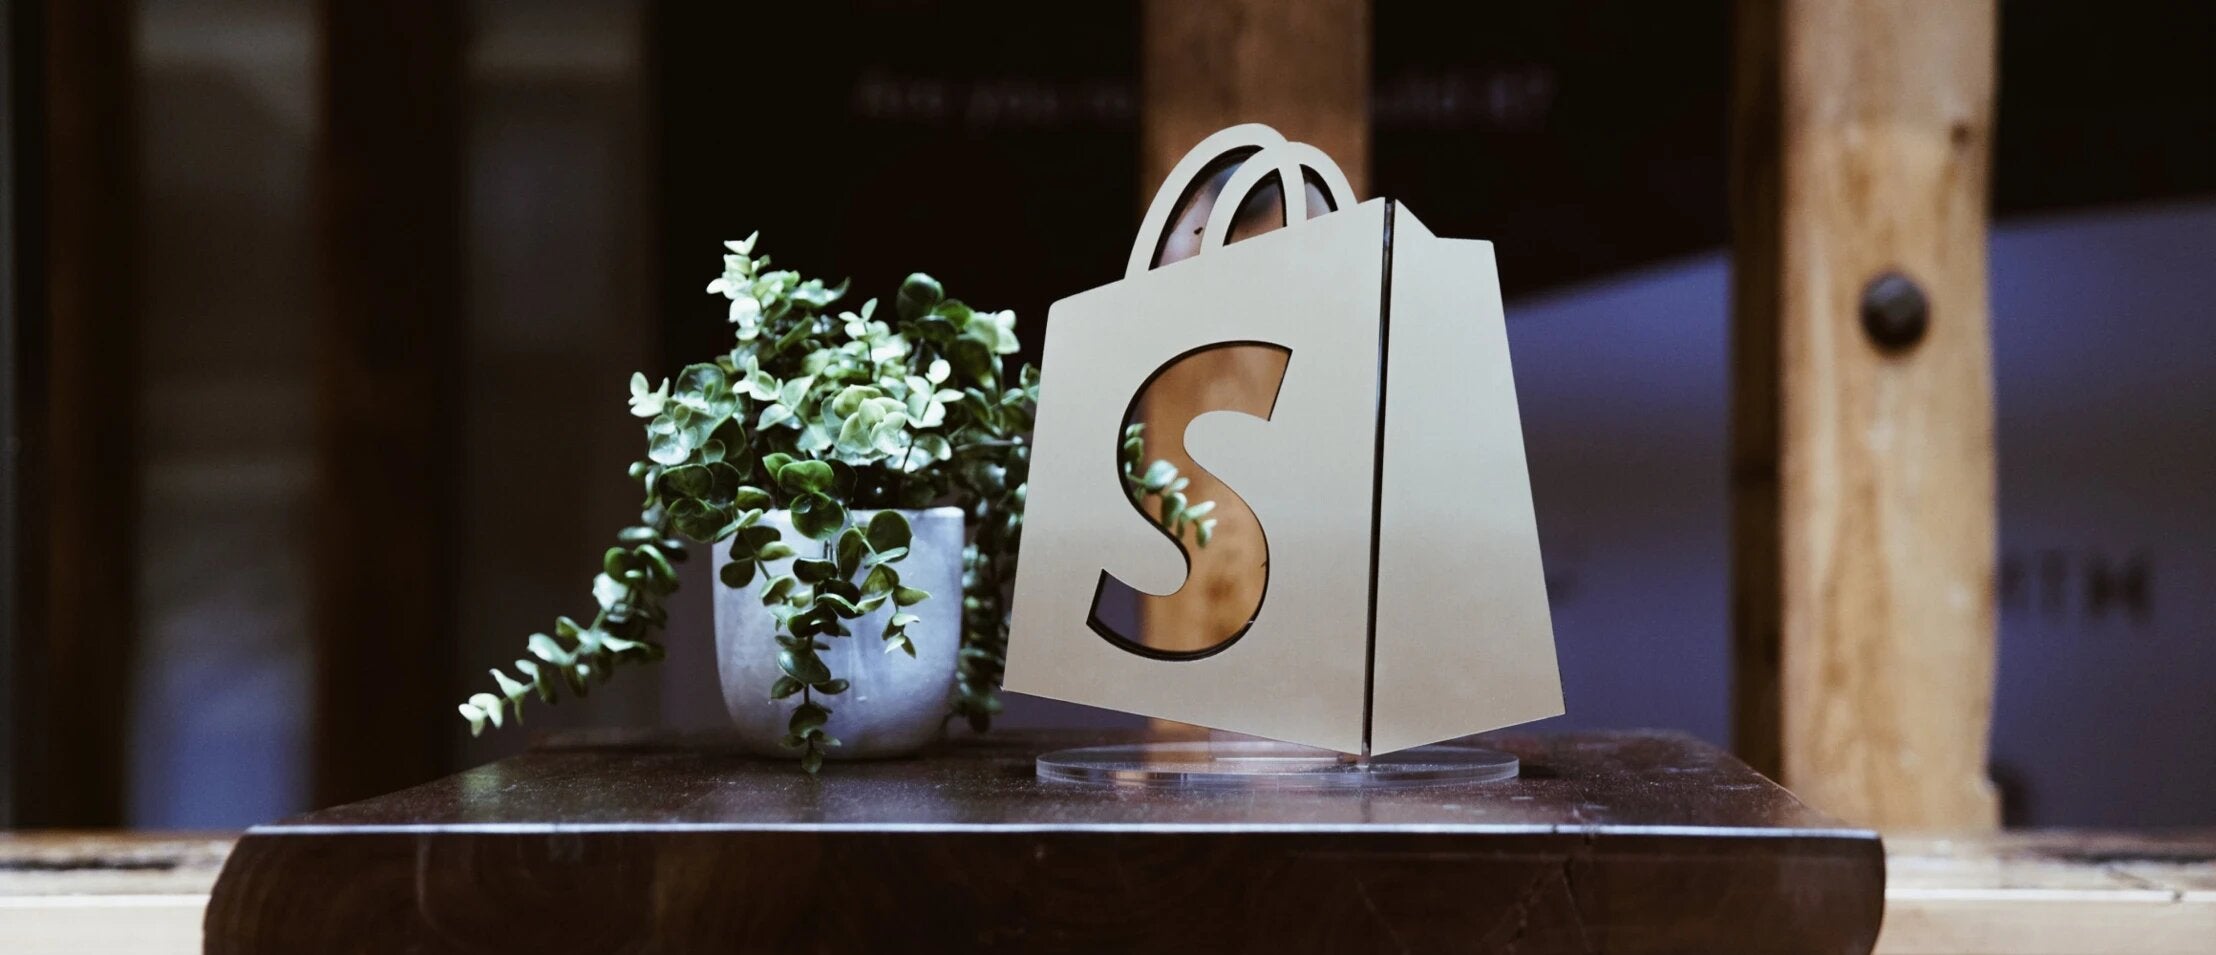 Shopify to reduce its workforce by 10% due to slowed growth